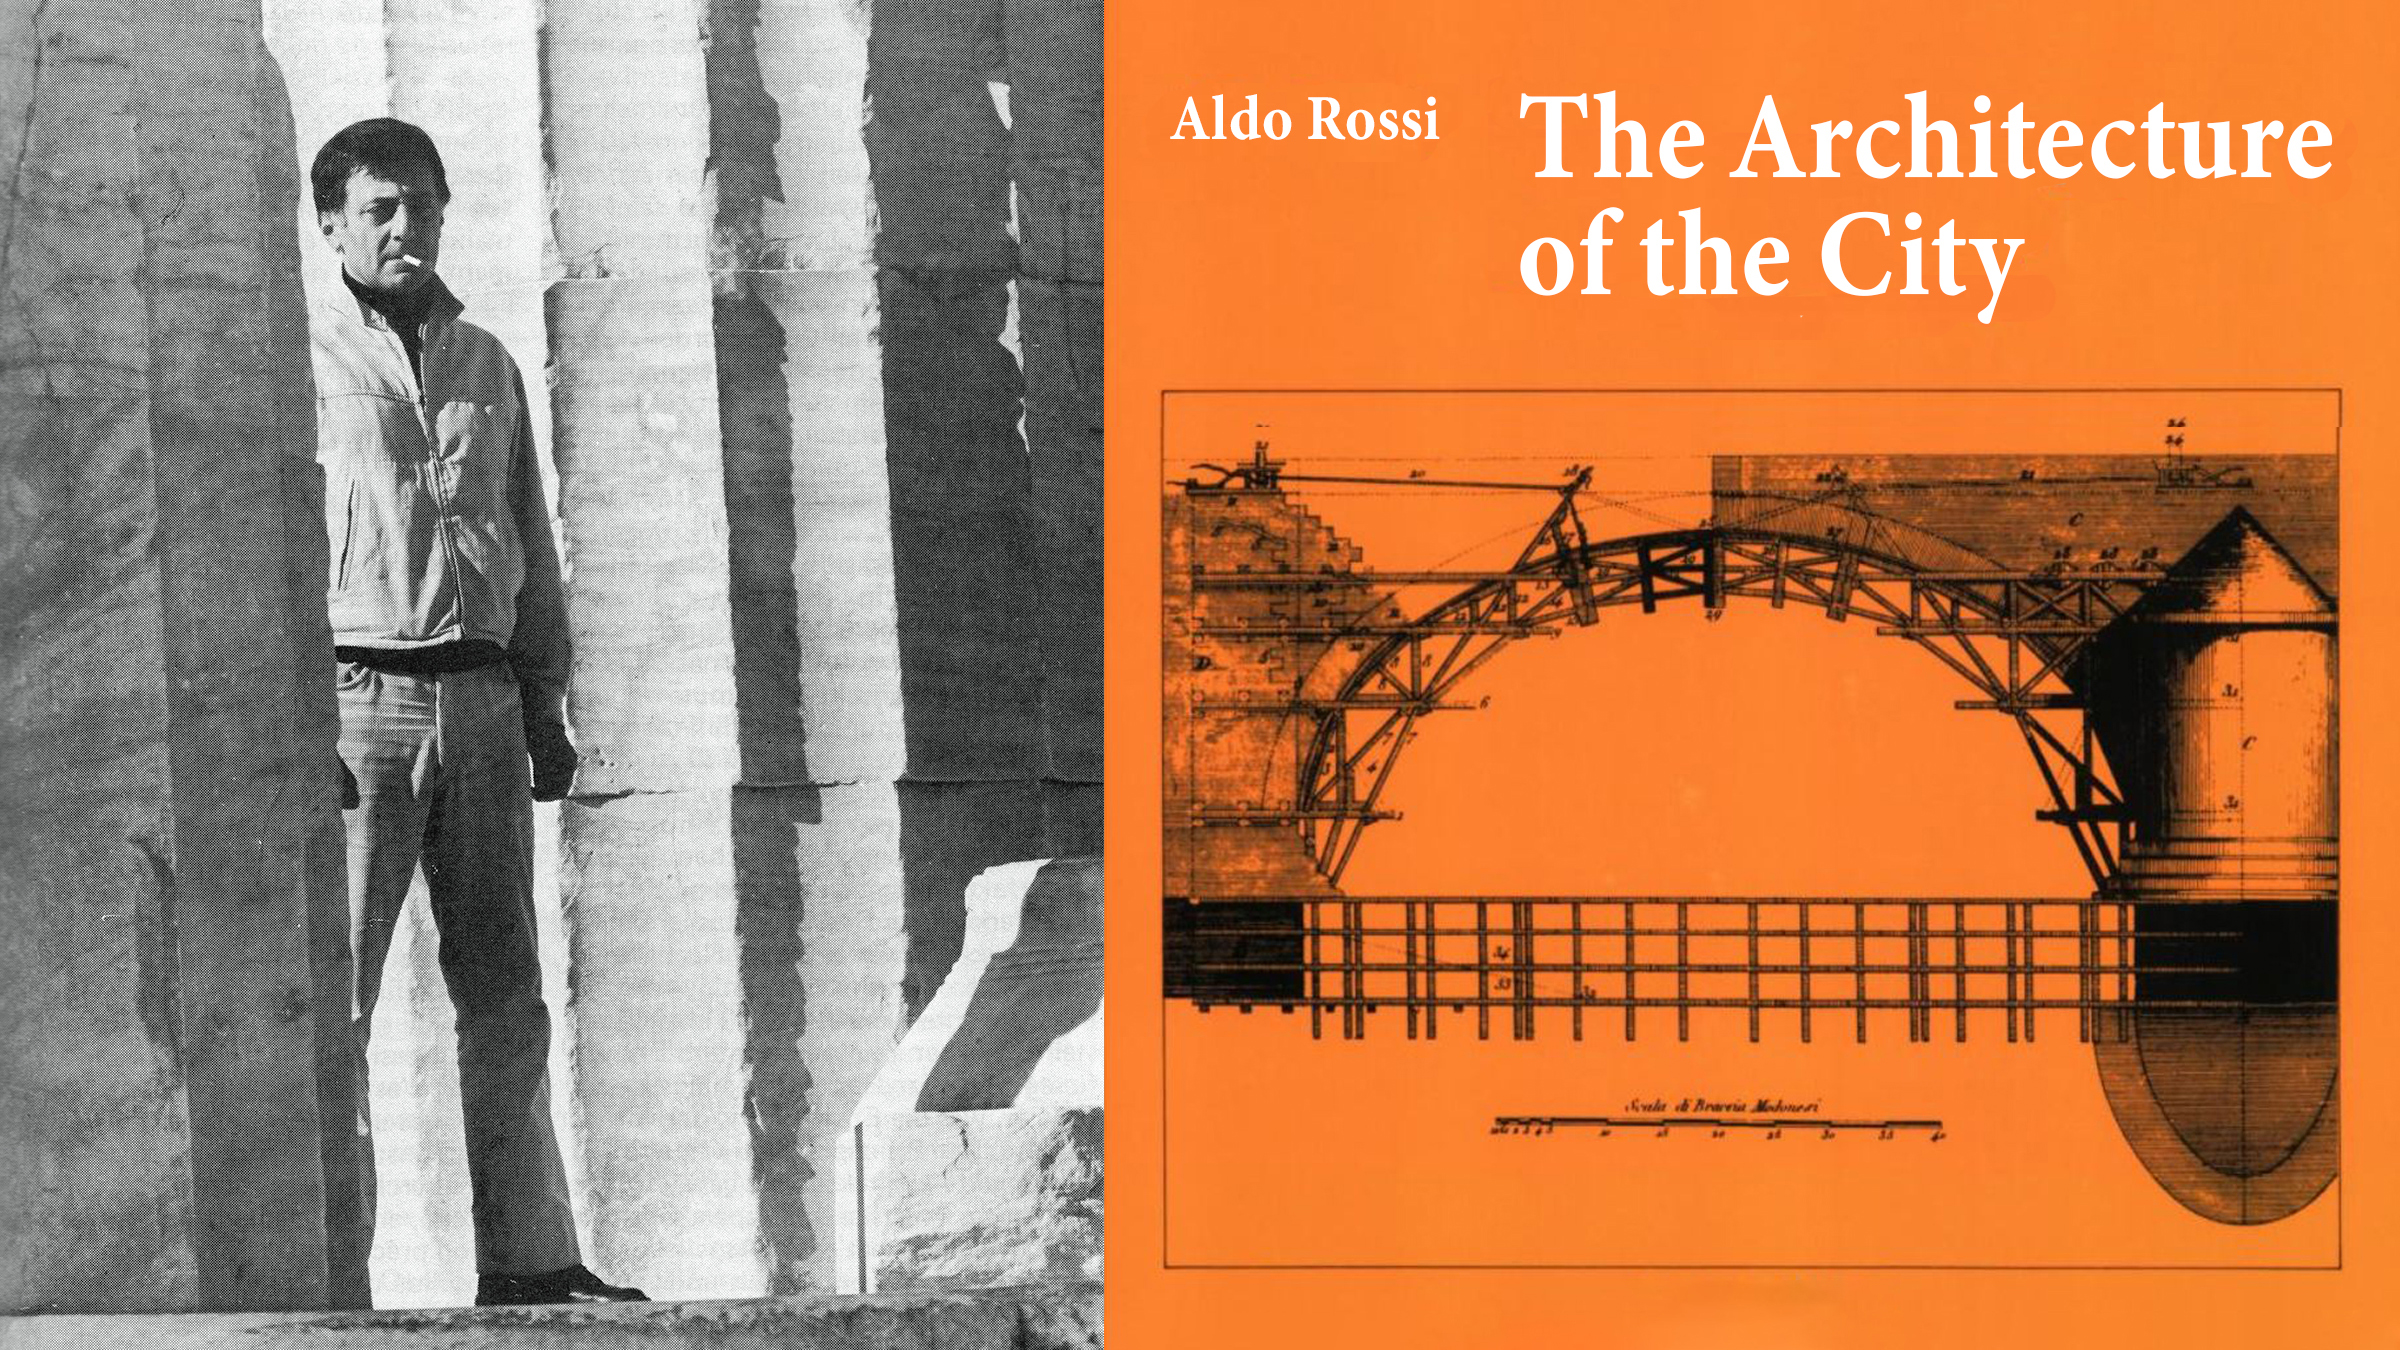 Aldo Rossi's seminal work on urban design theory, The Architect and the City, was published in 1966.